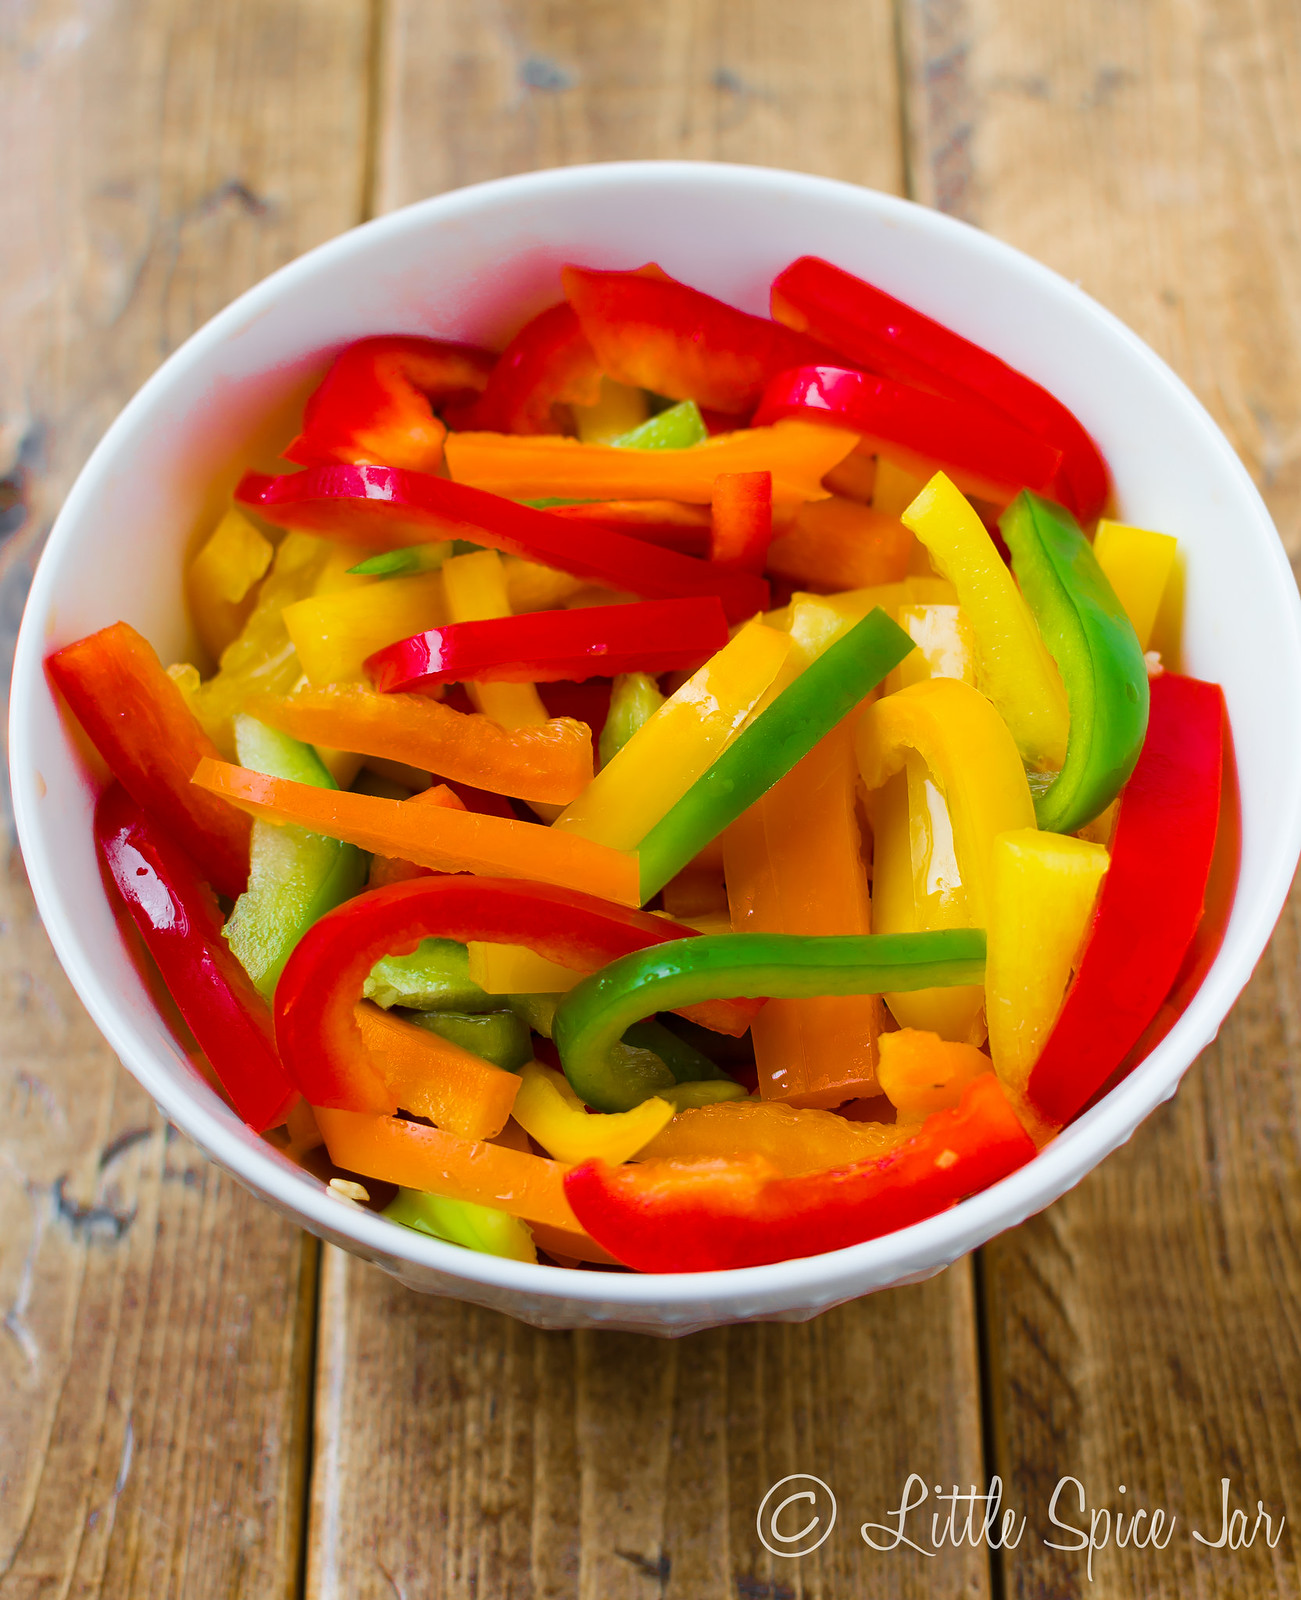 multi colored bell peppers in strips in white bowl on wood surface